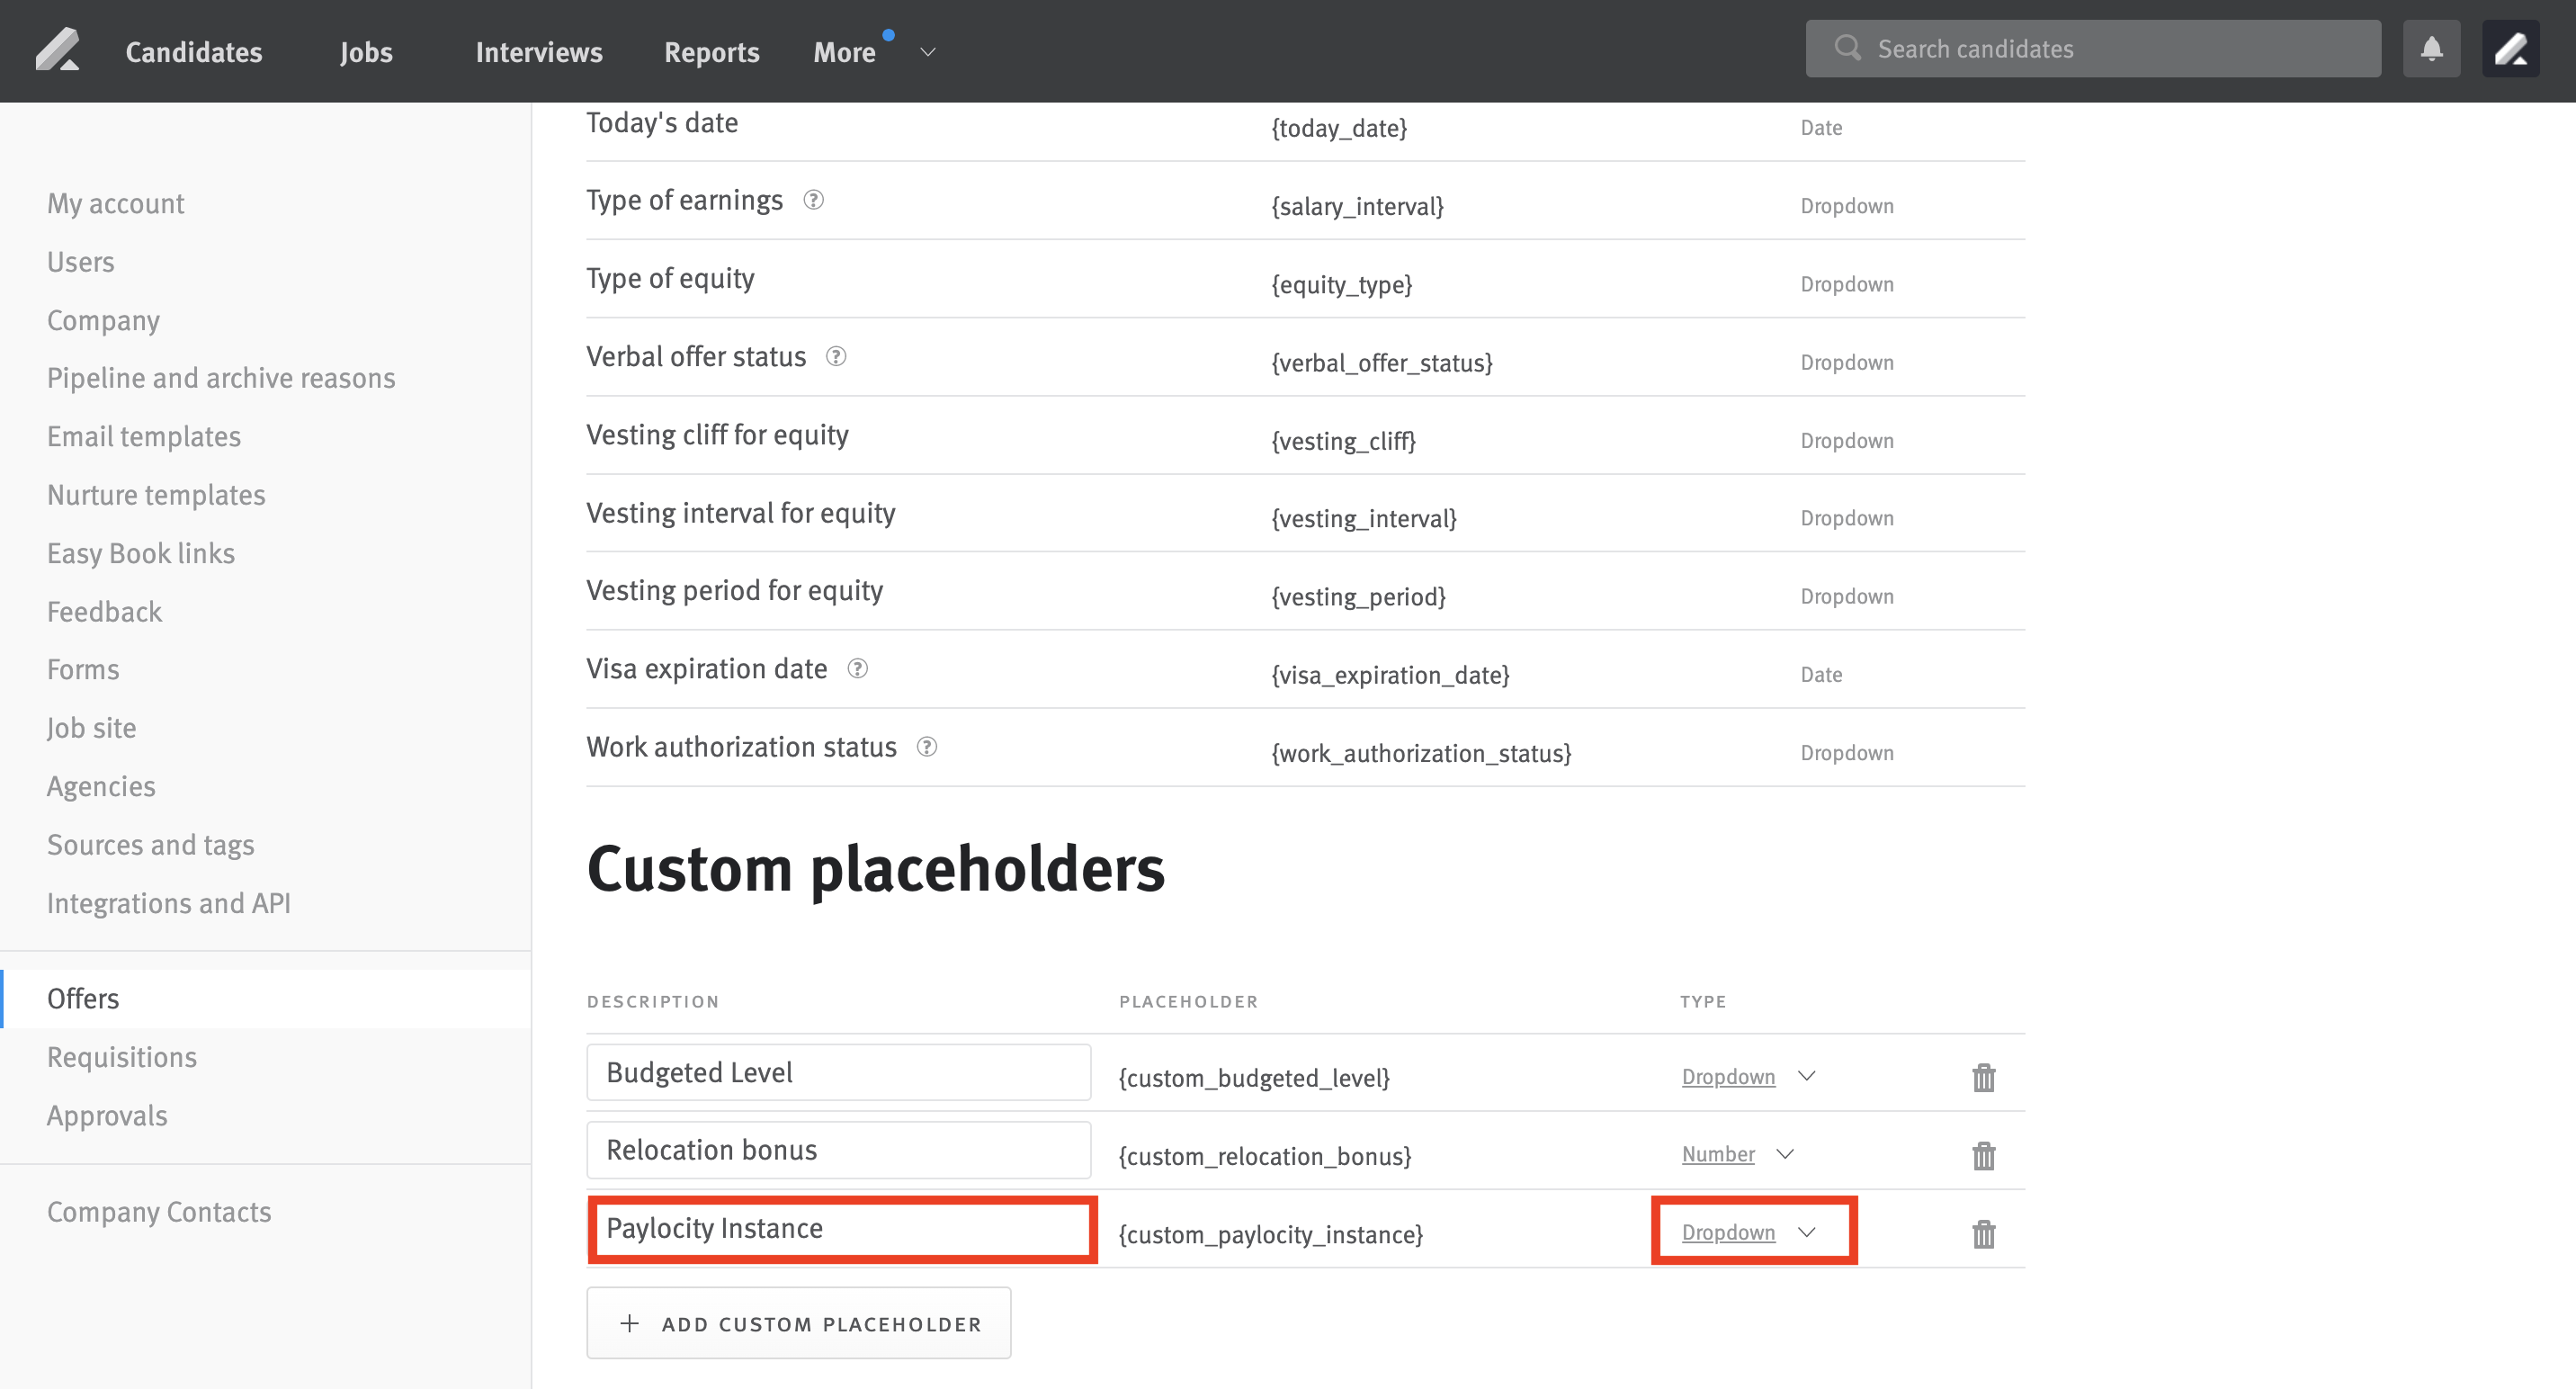 Offer fields list with Paylocity instance custom placeholder circled.